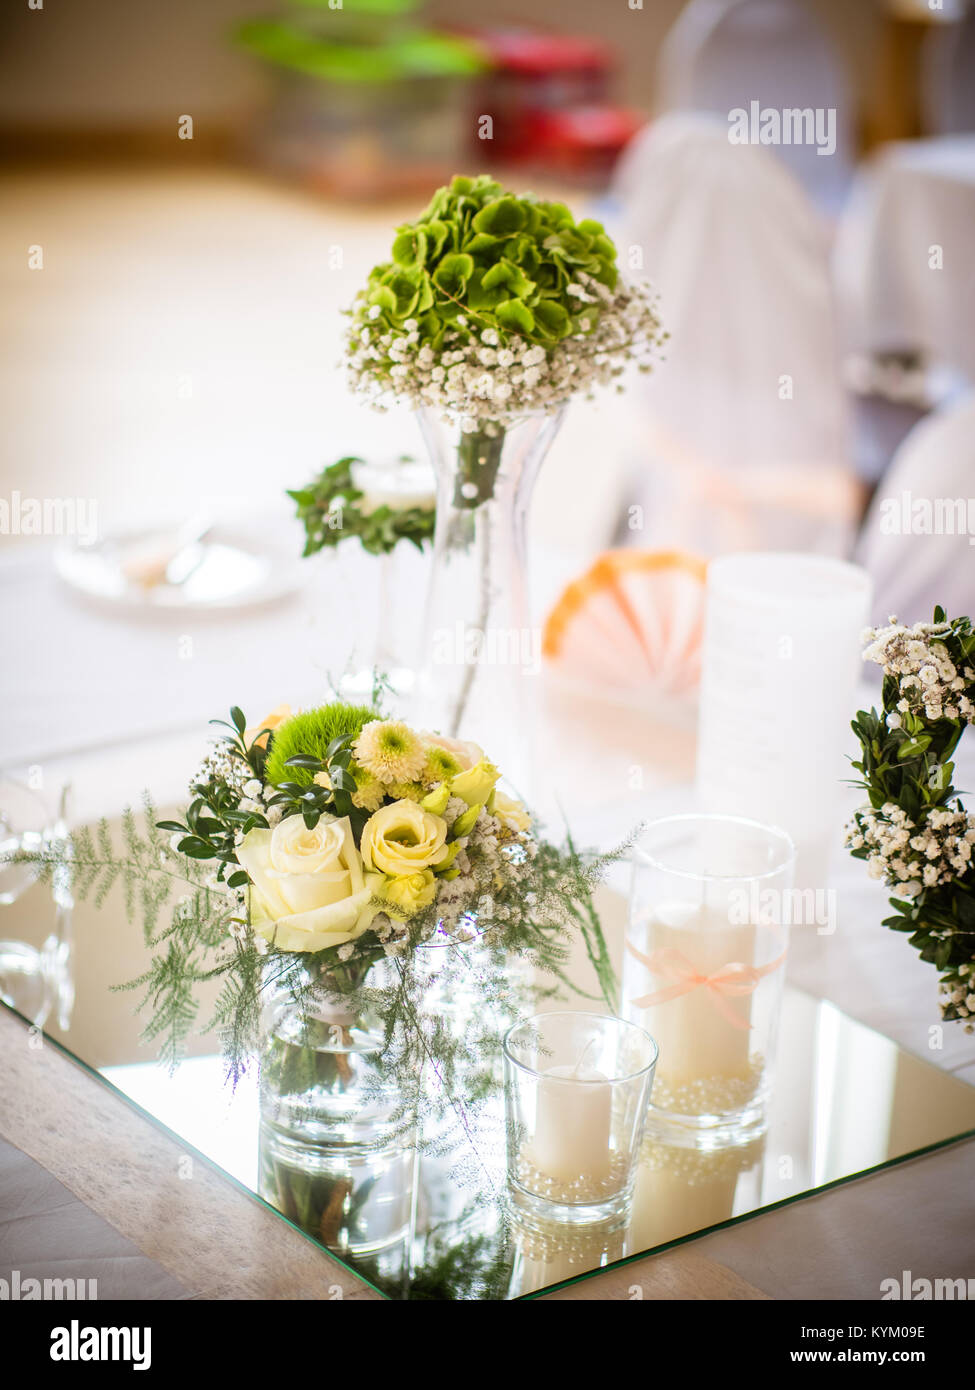 the small table decoration with white roses standing on a small mirror Stock Photo